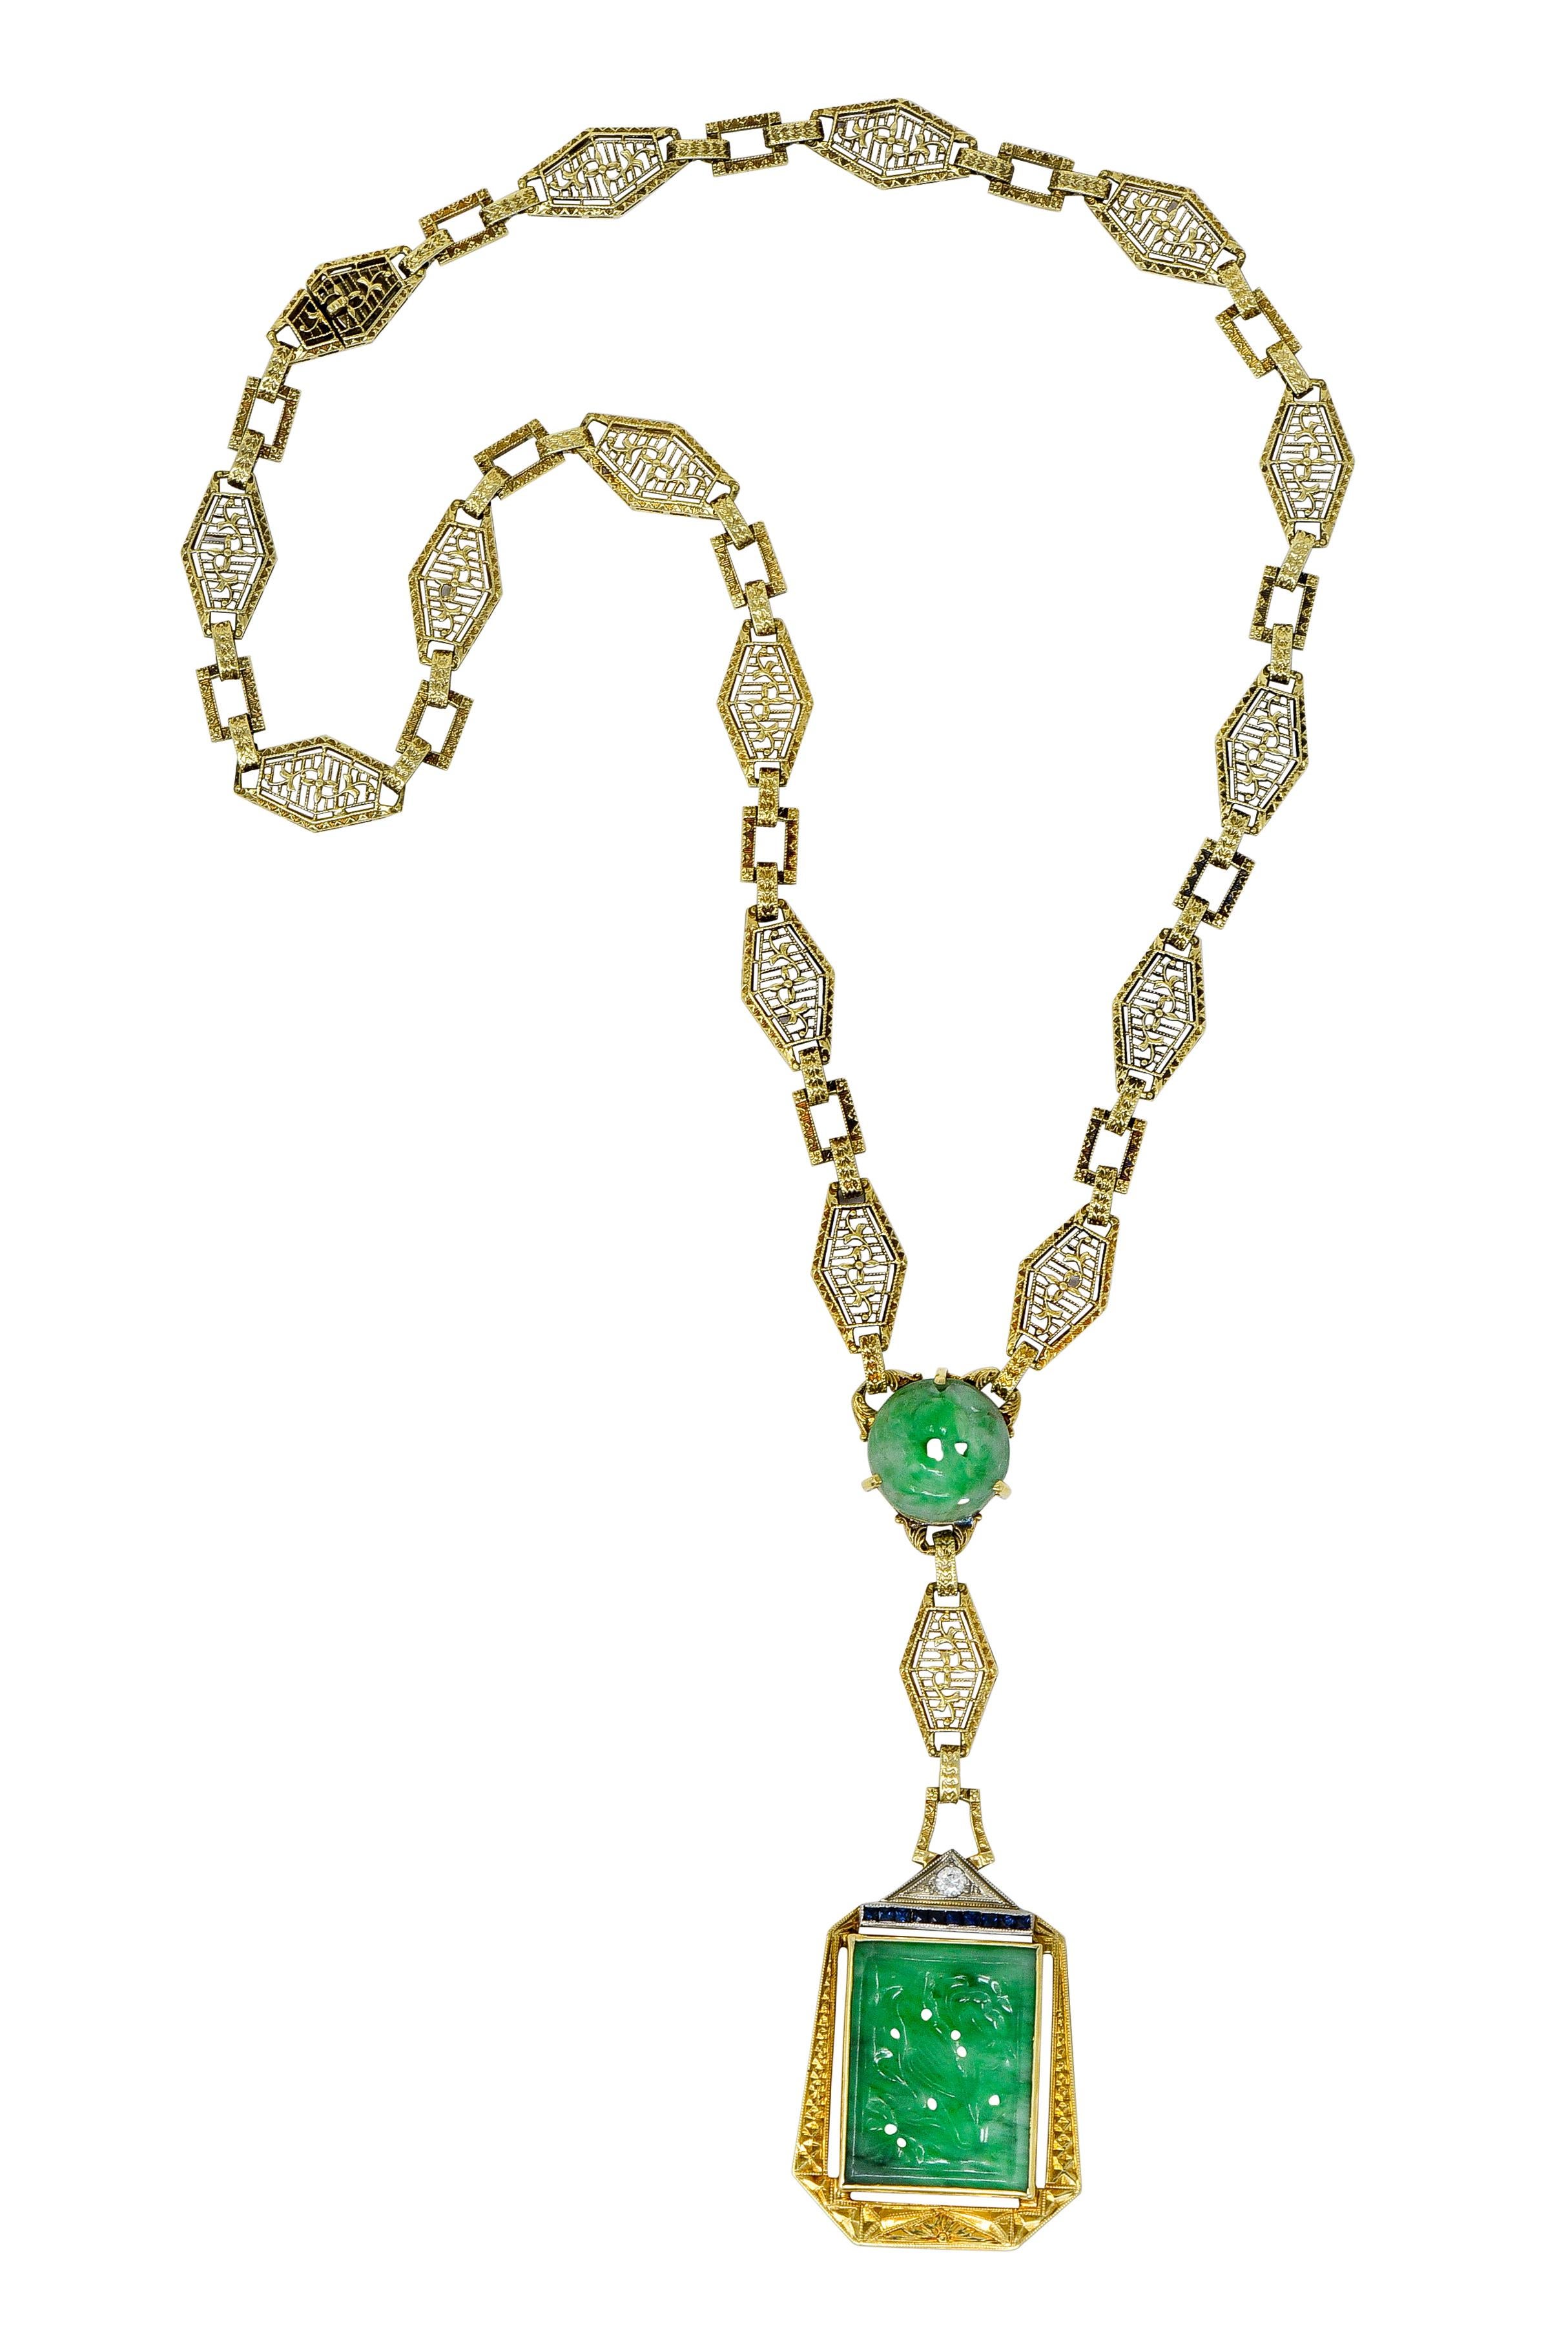 Necklace is comprised of pierced geometric links depicting an engraved floral motif and striated pattern

Alternating with engraved rectangular links and foliate spacer links and completed as a concealed clasp

Centering a round 11.8 mm carved jade